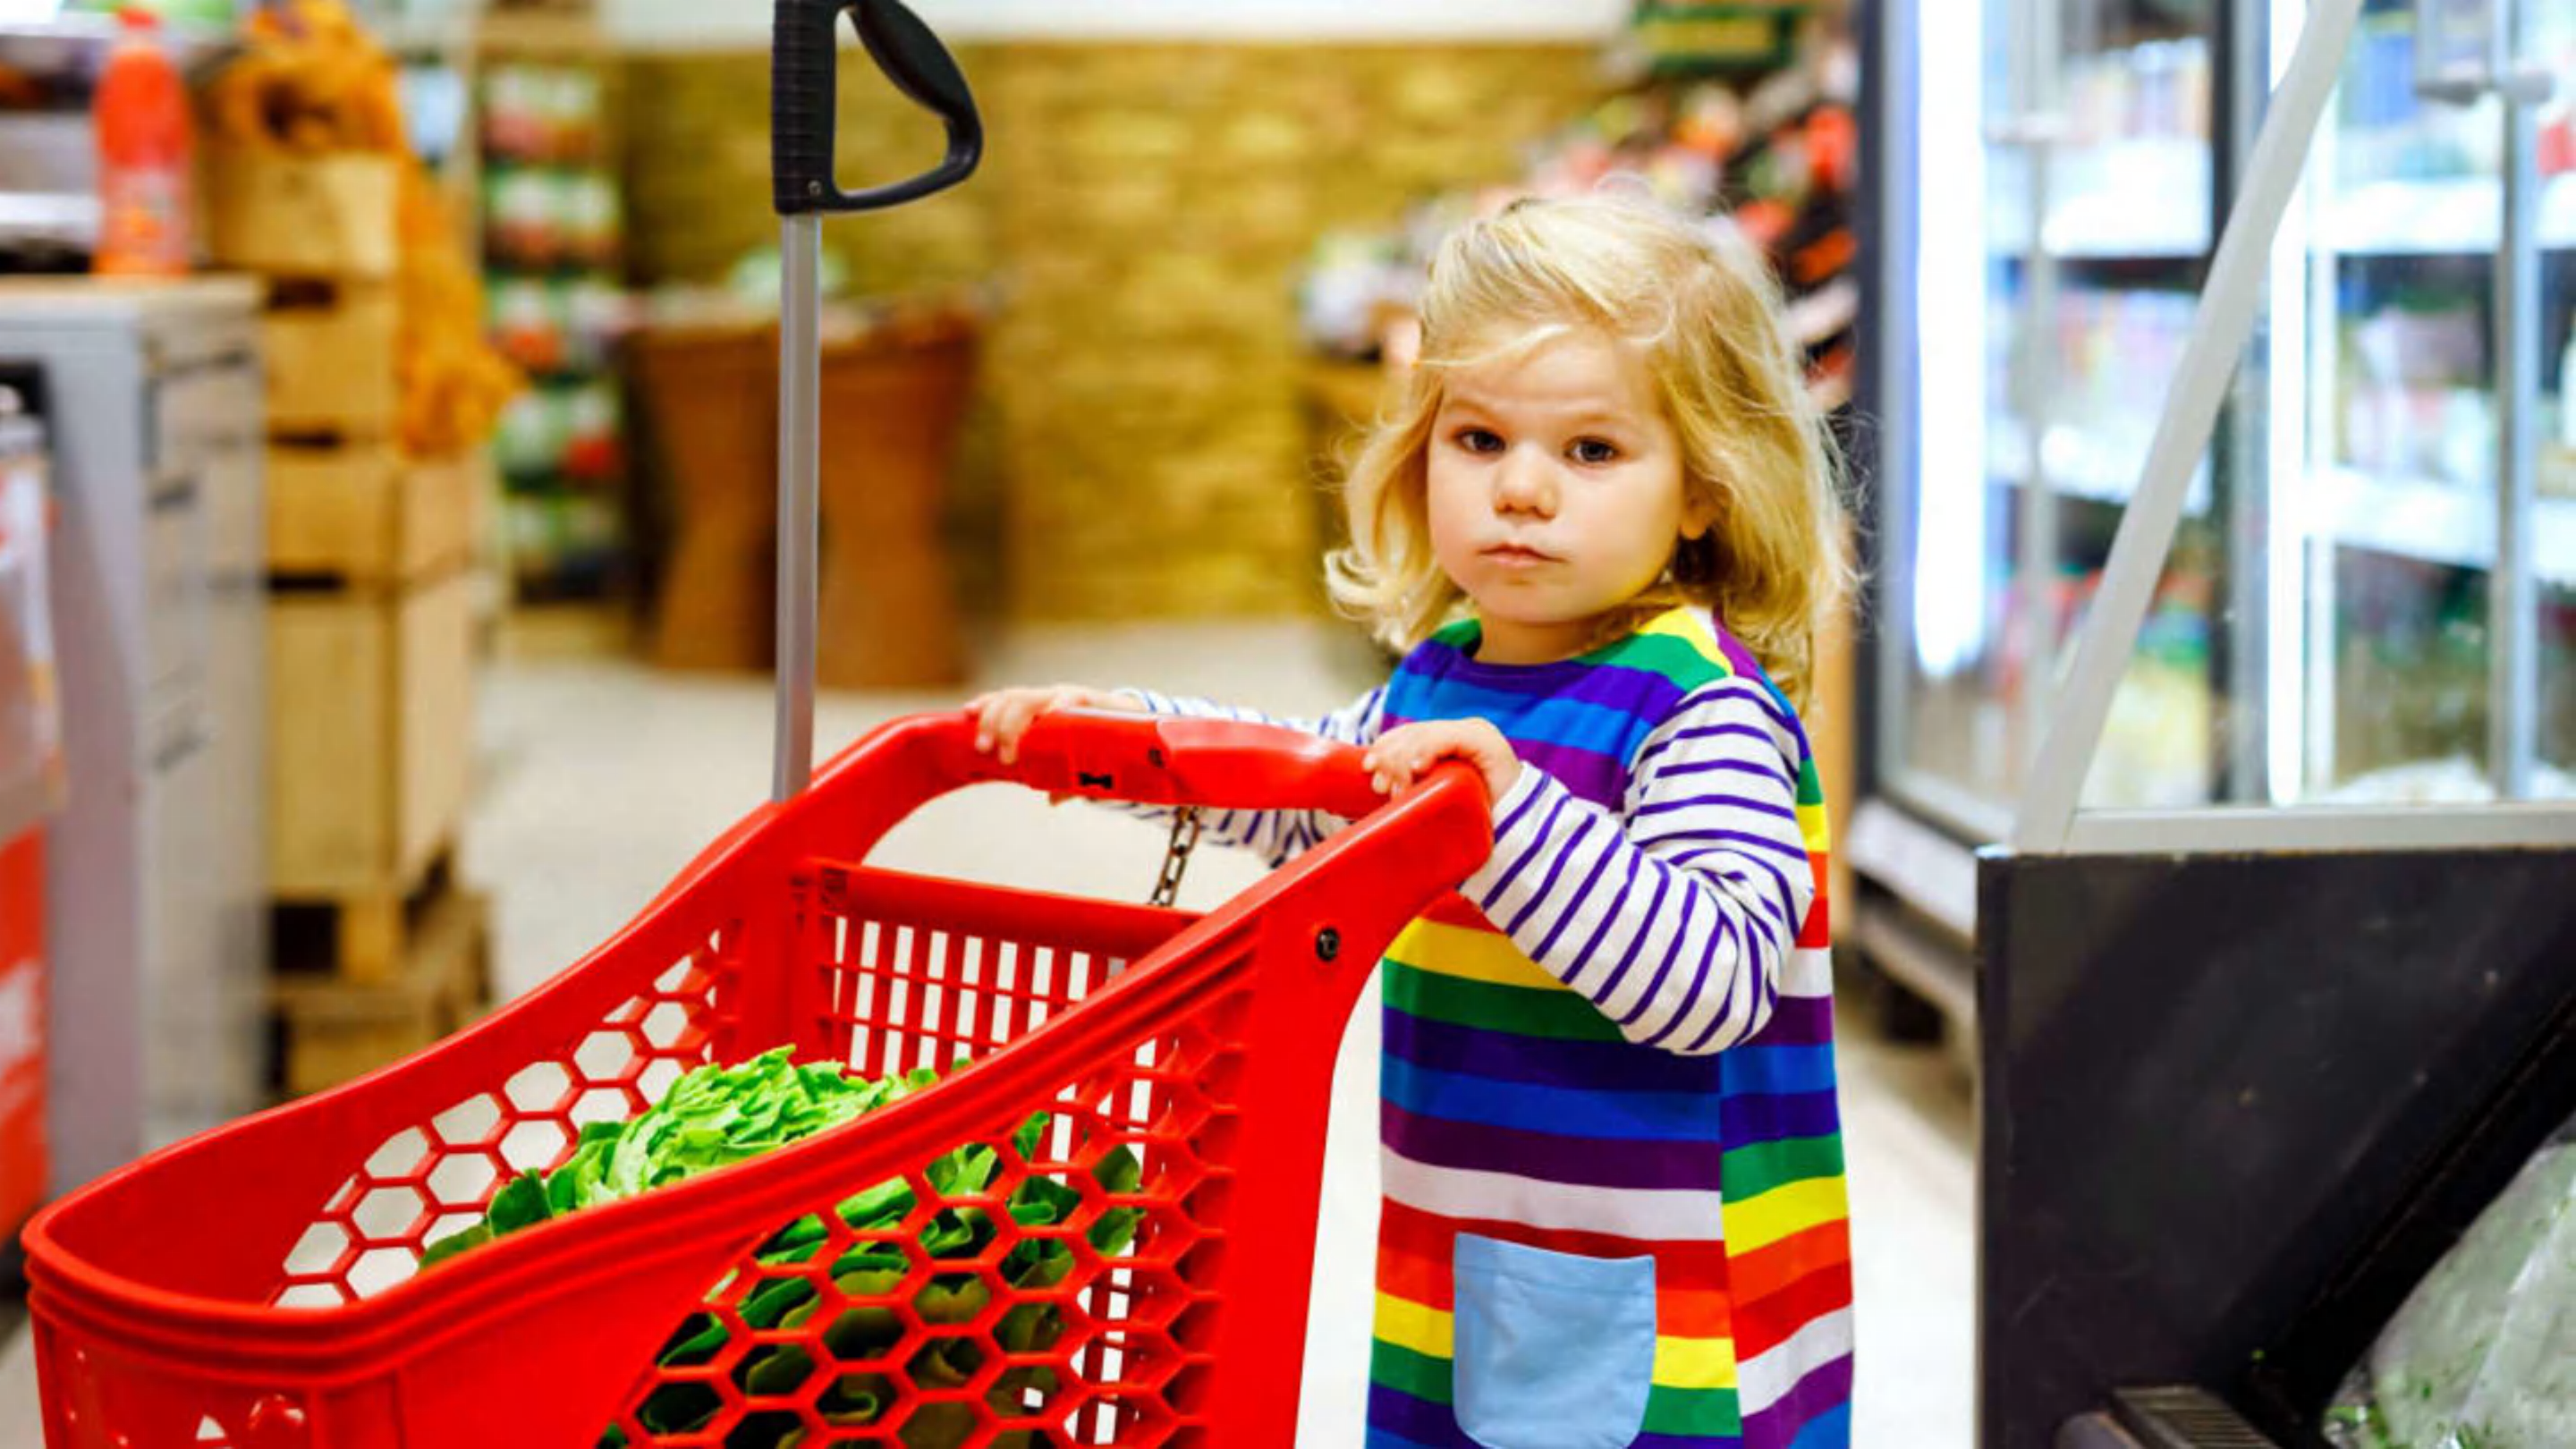 The Smart Reason Grocery Stores Offer Pint-Sized Shopping Carts for
Kids